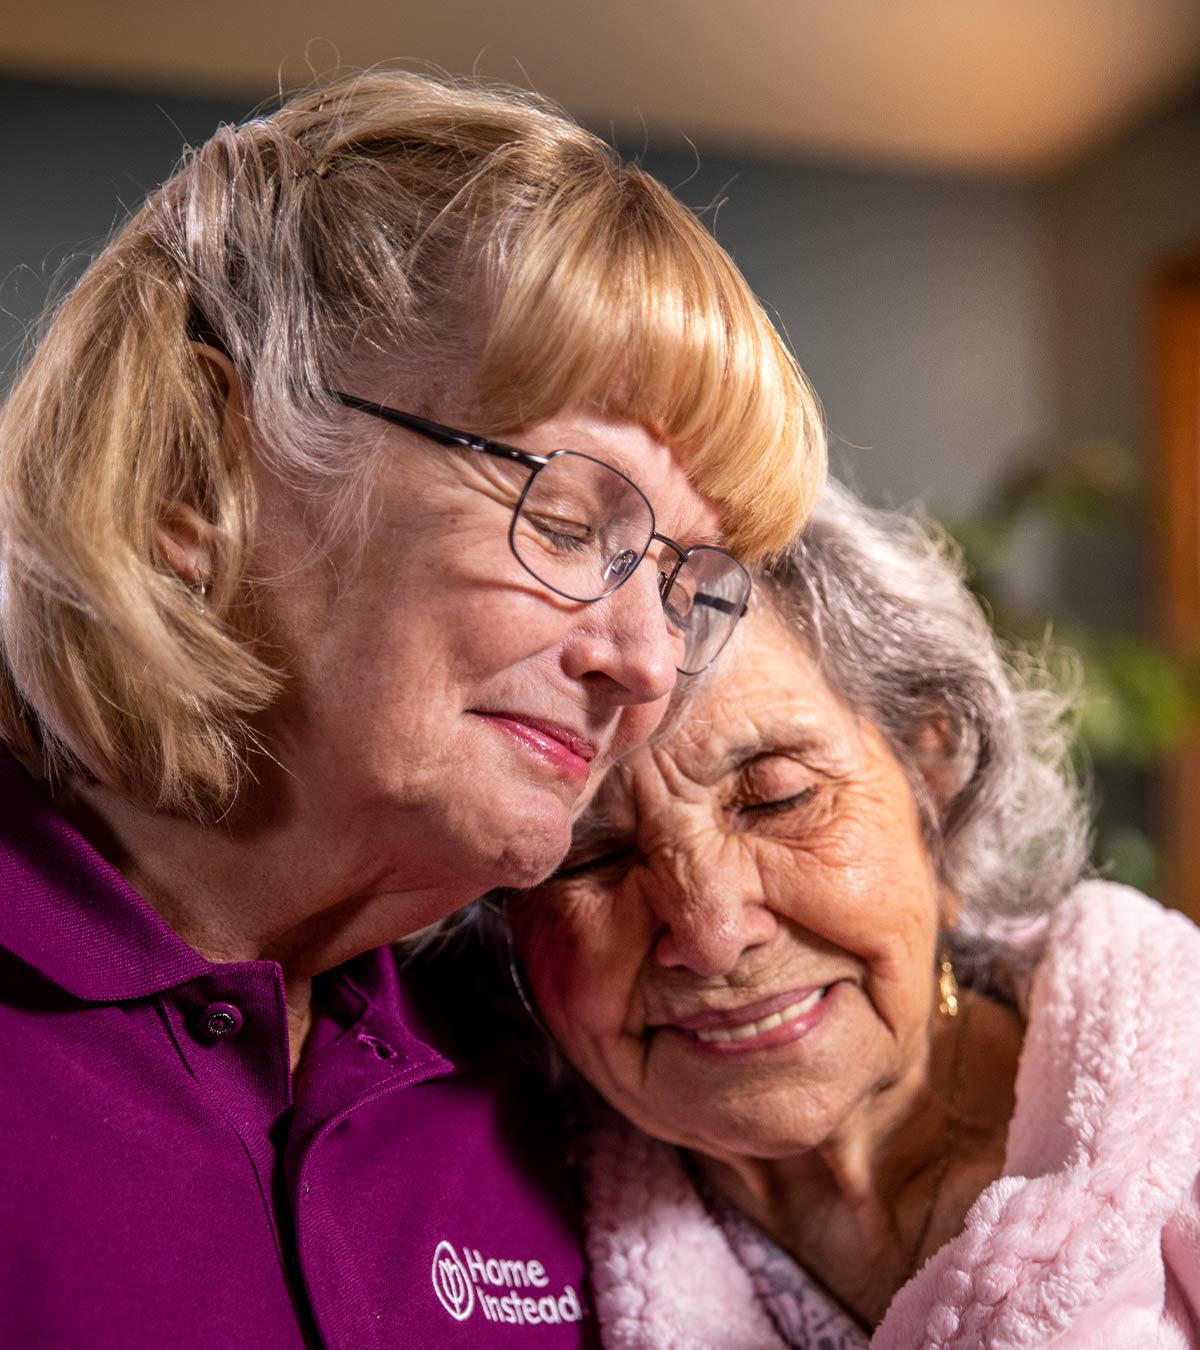 CAREGiver providing in-home senior care services. Home Instead of Racine, WI provides Elder Care to aging adults. 